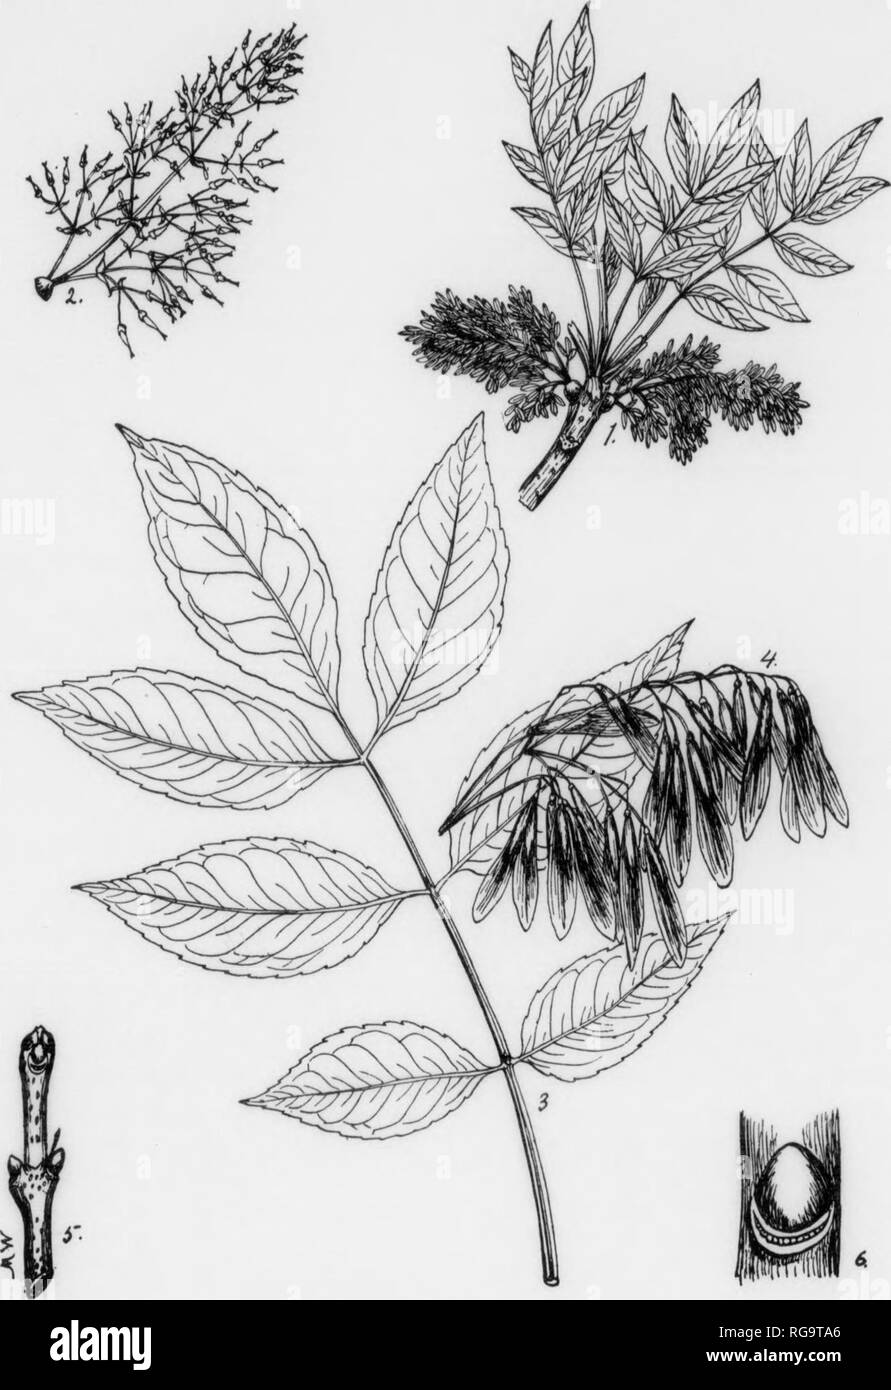 . Bulletin (Pennsylvania Department of Forestry), no. 11. Forests and forestry. 220 WHITE ASH Fraxinus americana, Linnaeus FORM—Usually reaches a height of 70-80 ft. with a diameter of 2-3 ft. but may attain a height of 120 ft. with a diamieter of 5-6 ft. Trunk usually tall, massive, clear of branches for a considerable distance from the ground when grown in the forest, bearing a naiTow, some- what pyramidal crown. When open-grown the crown is decidedly round-topped and often extends almost to the ground. In forest-grown trees tnmk often continuous and dividing into a number of spreading branc Stock Photo